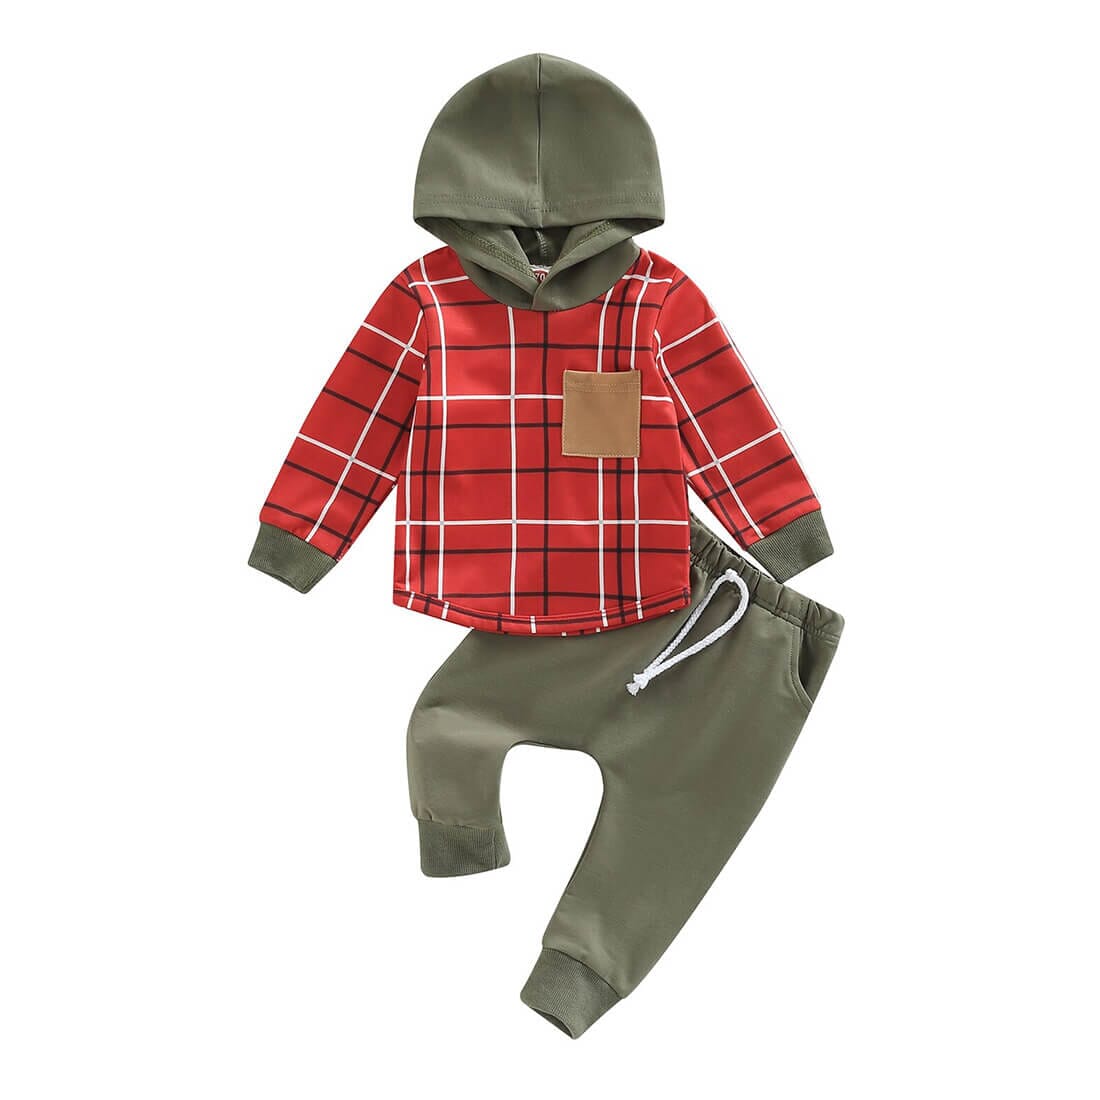 Olive Plaid Hoodie Baby Set Sets The Trendy Toddlers 